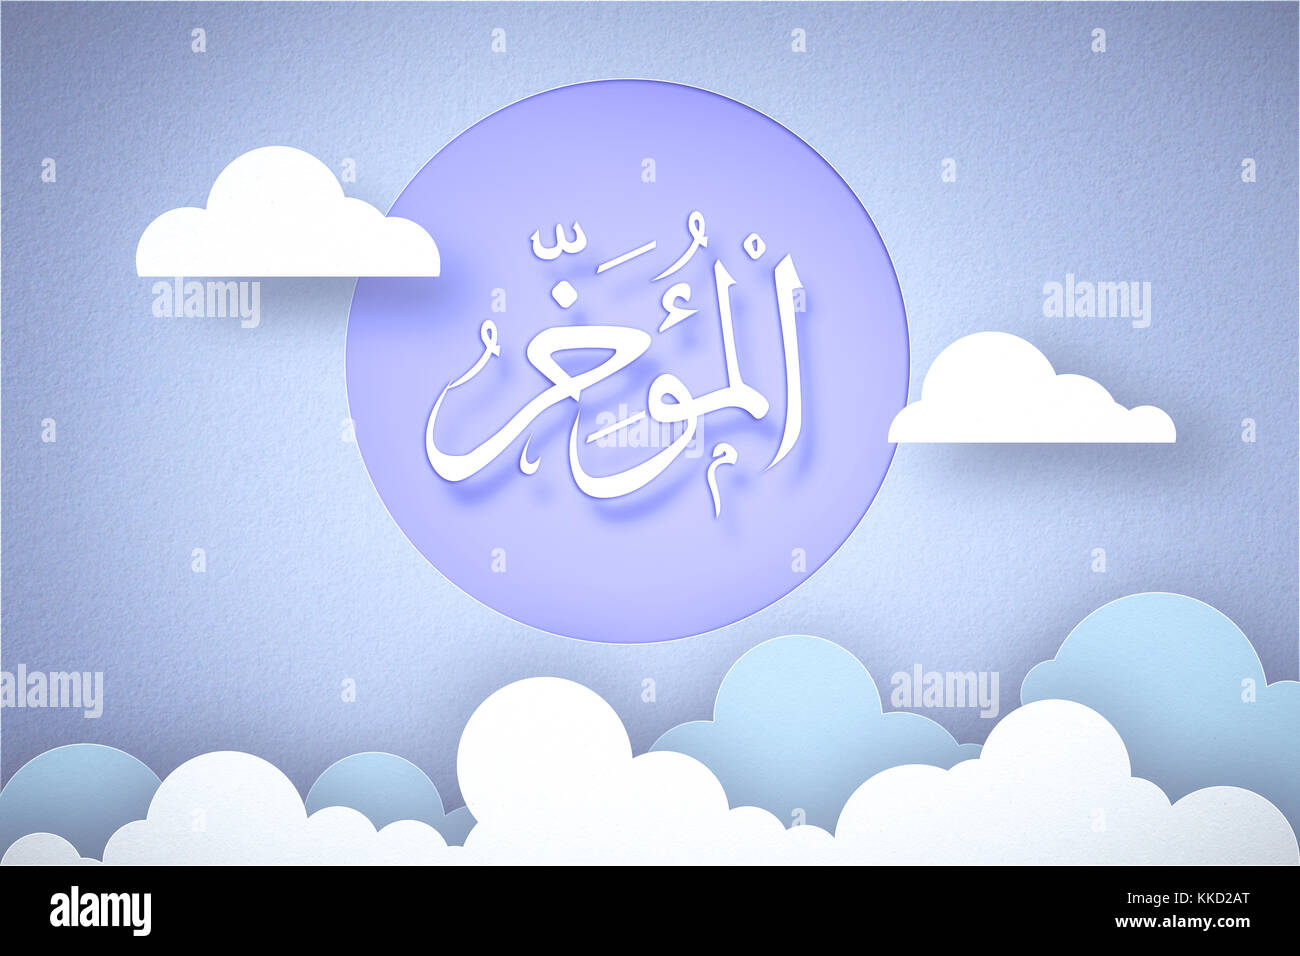 Allah in Arabic Writing , God Name in Arabic sky background, paper style Stock Photo